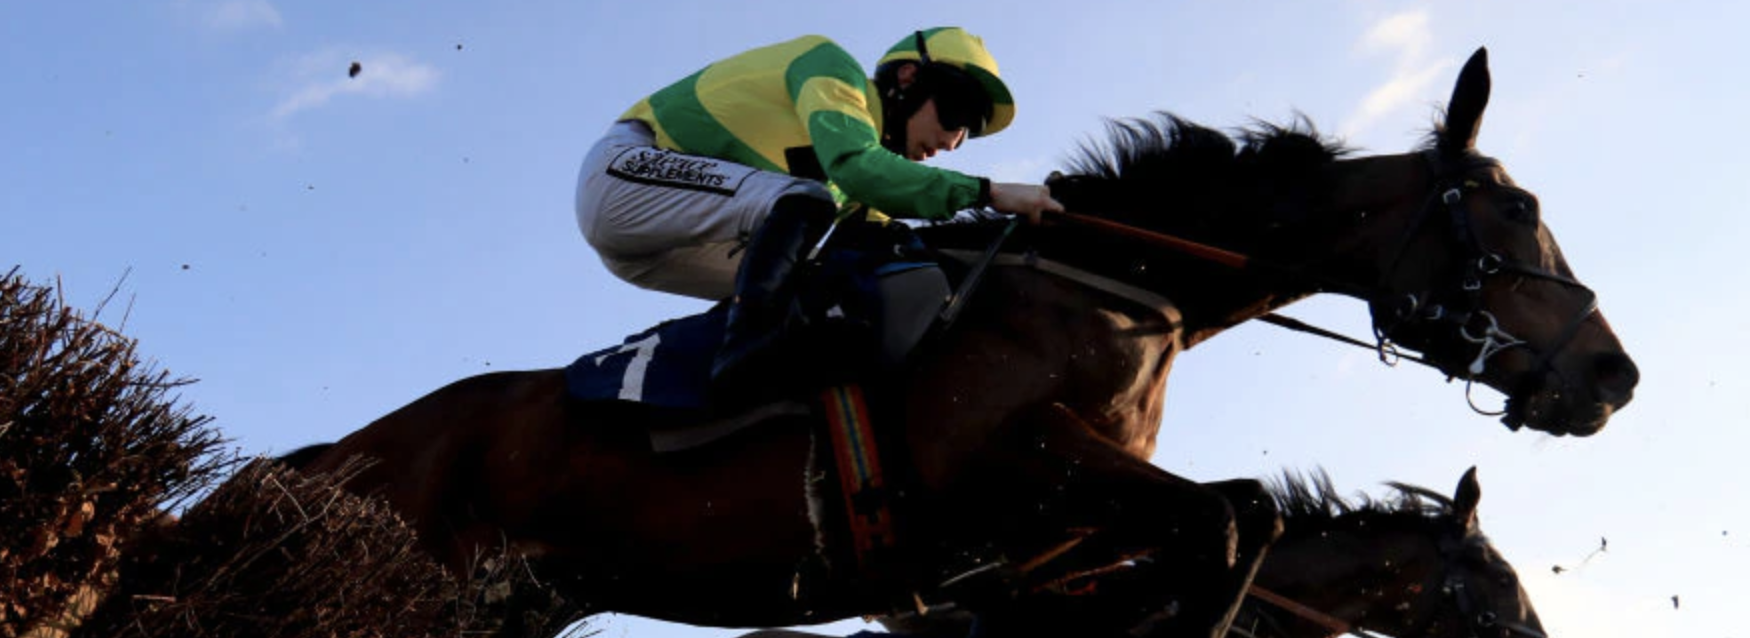 Can British Horseracing Move Away from Tradition to Embrace a New Future?